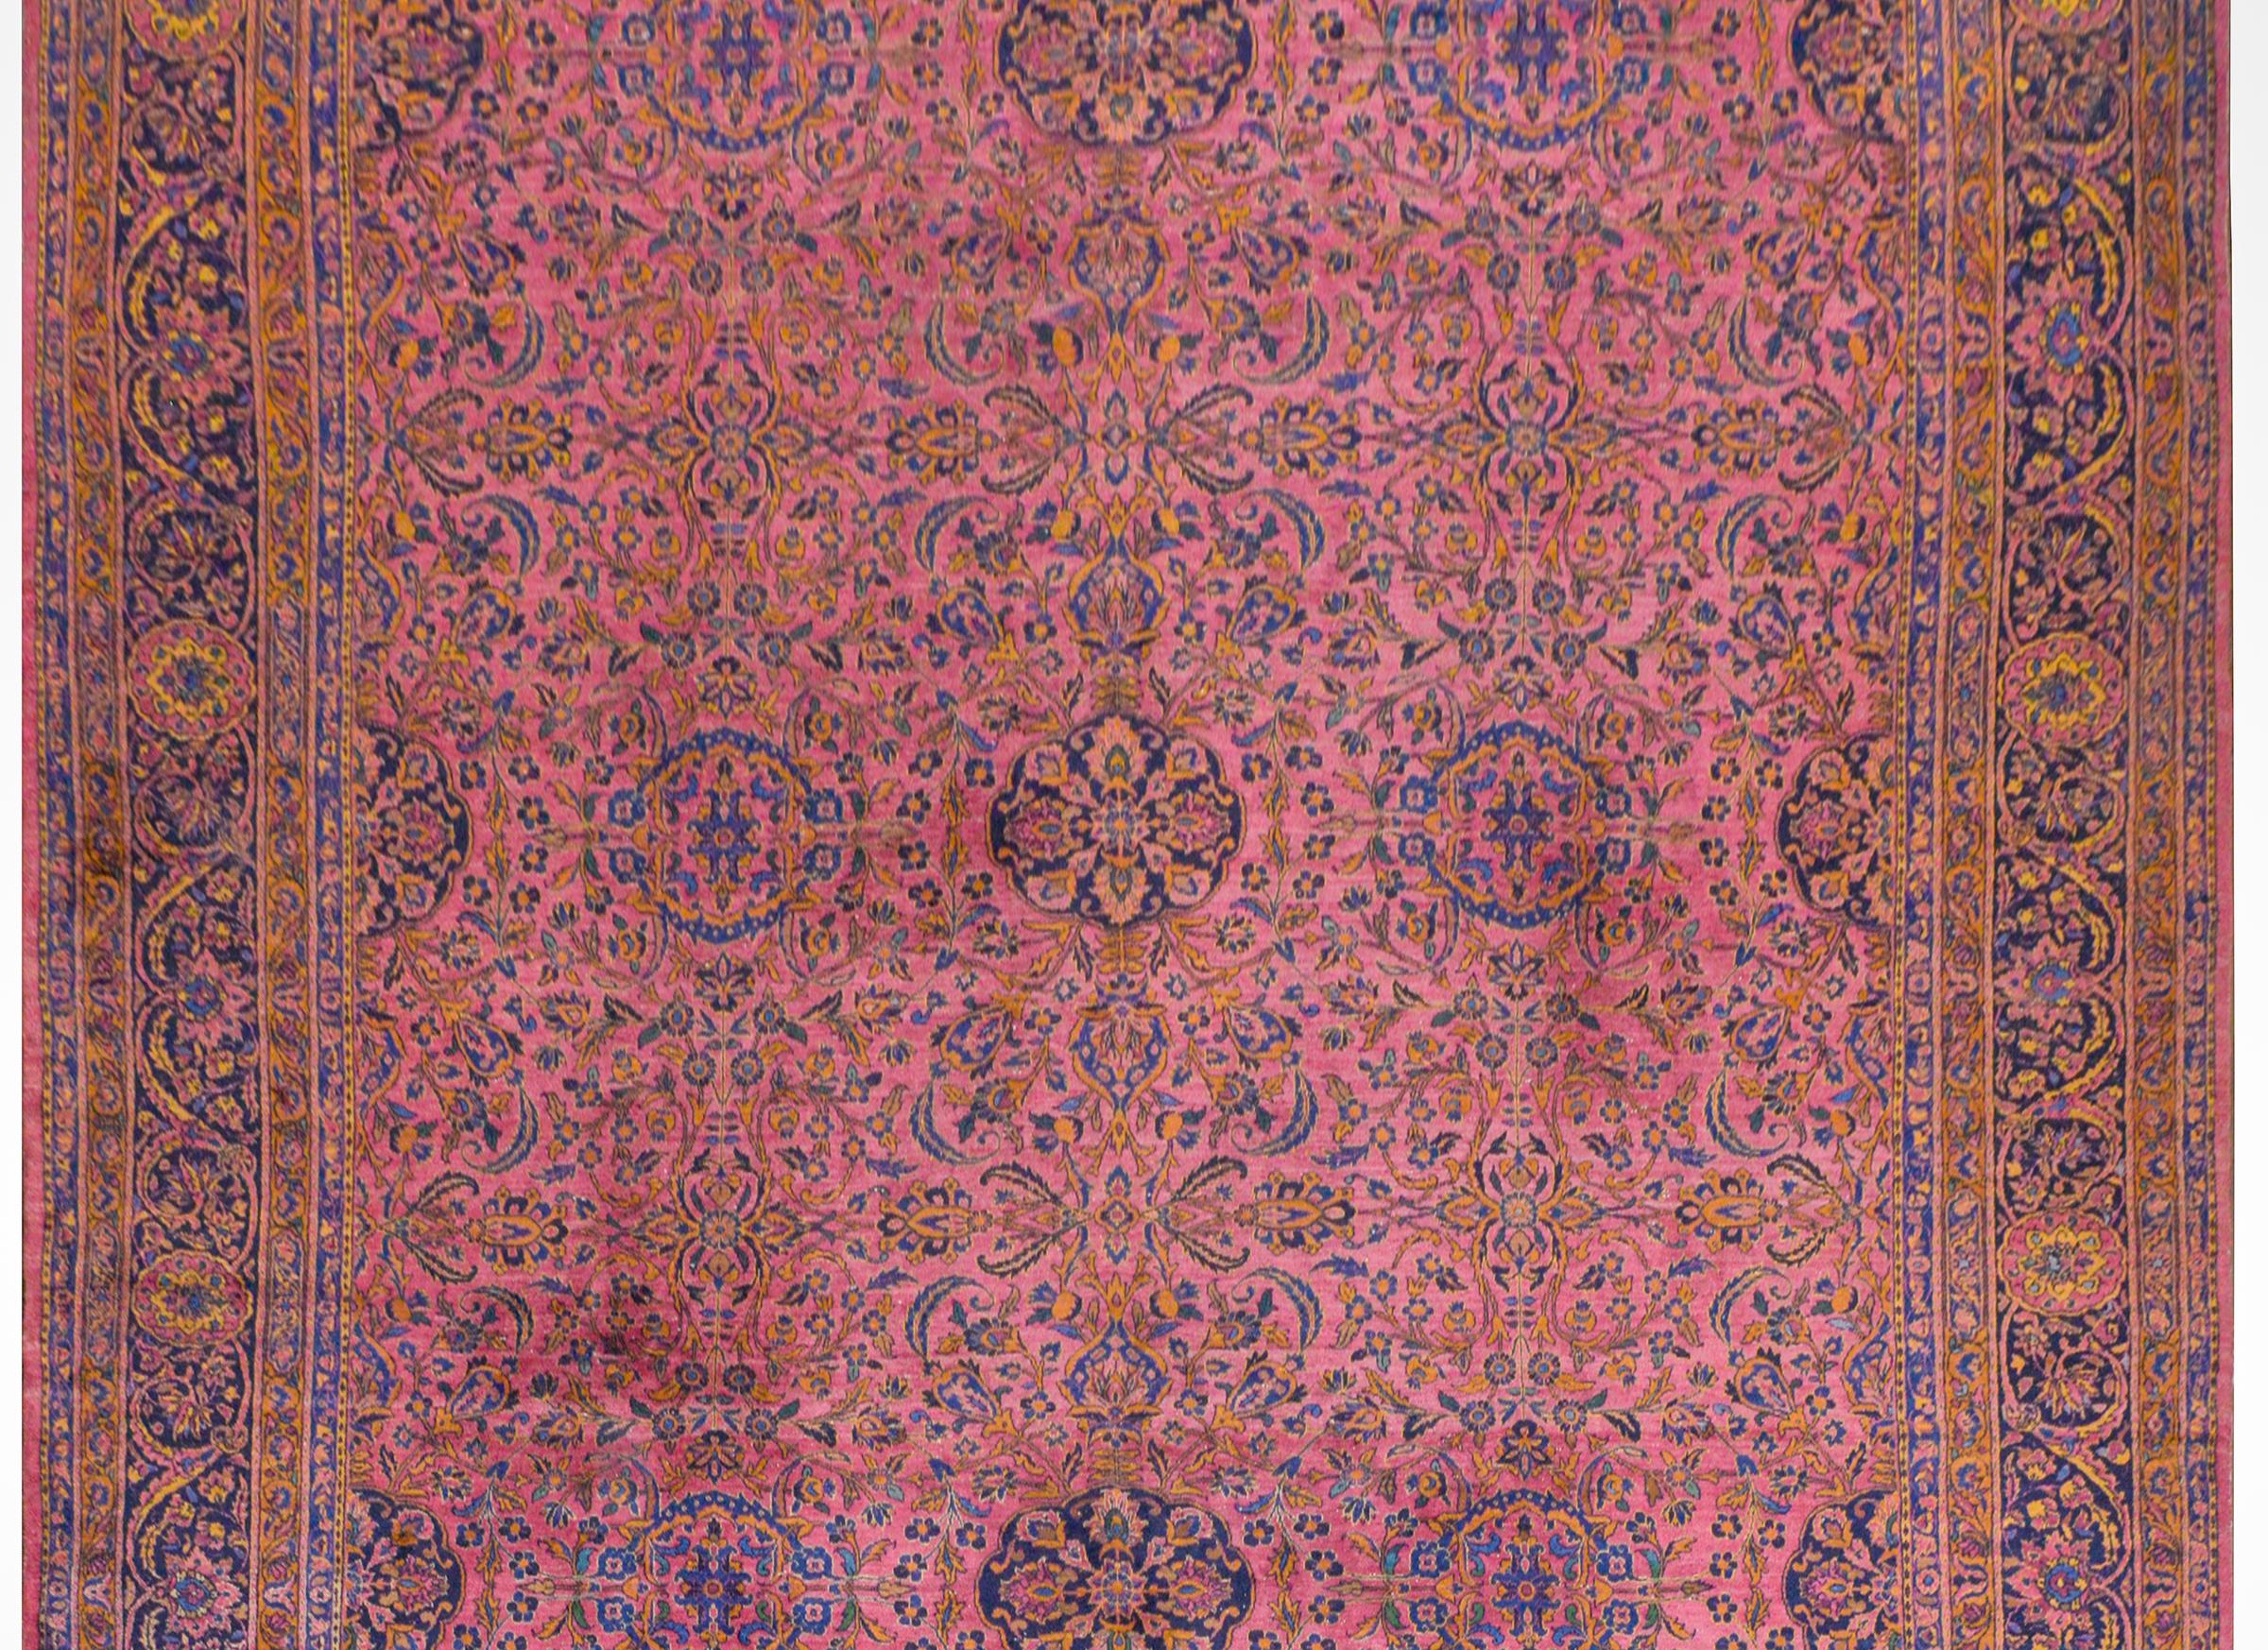 A monumental early 20th century Indian Kashan rug with an all-over floral and vine pattern with multiple floral medallions, all woven in light and dark indigo, gold, and cream colored wool on a bright cranberry background. The border is